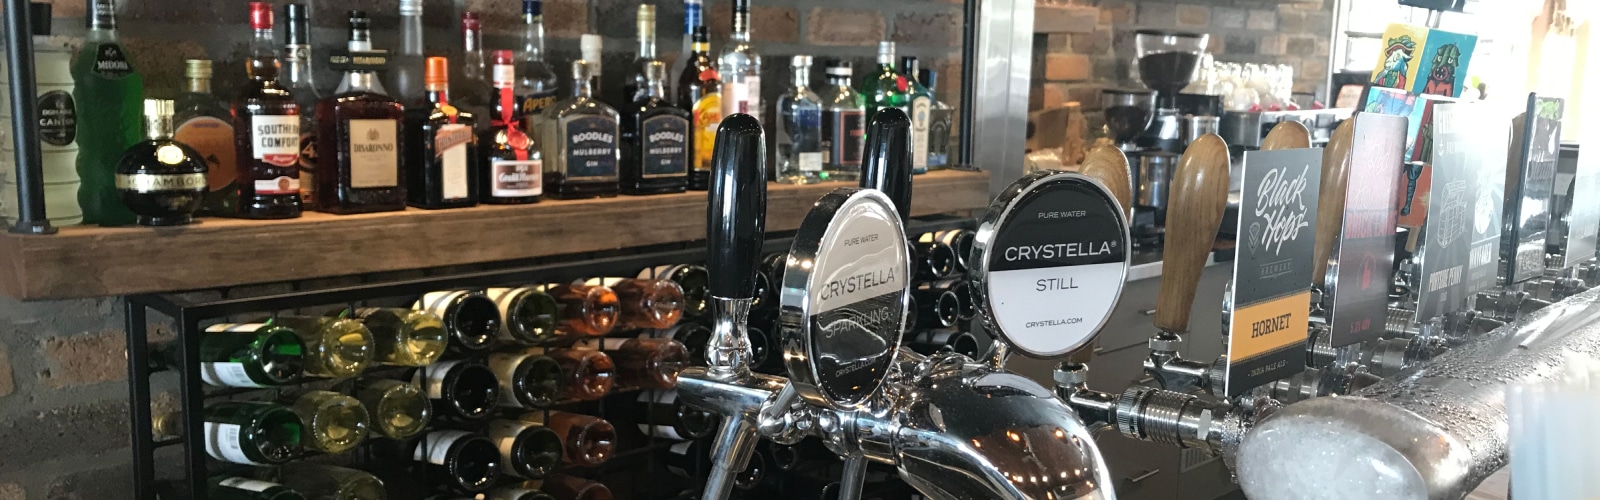 Crystella Sparkling Water Tap System